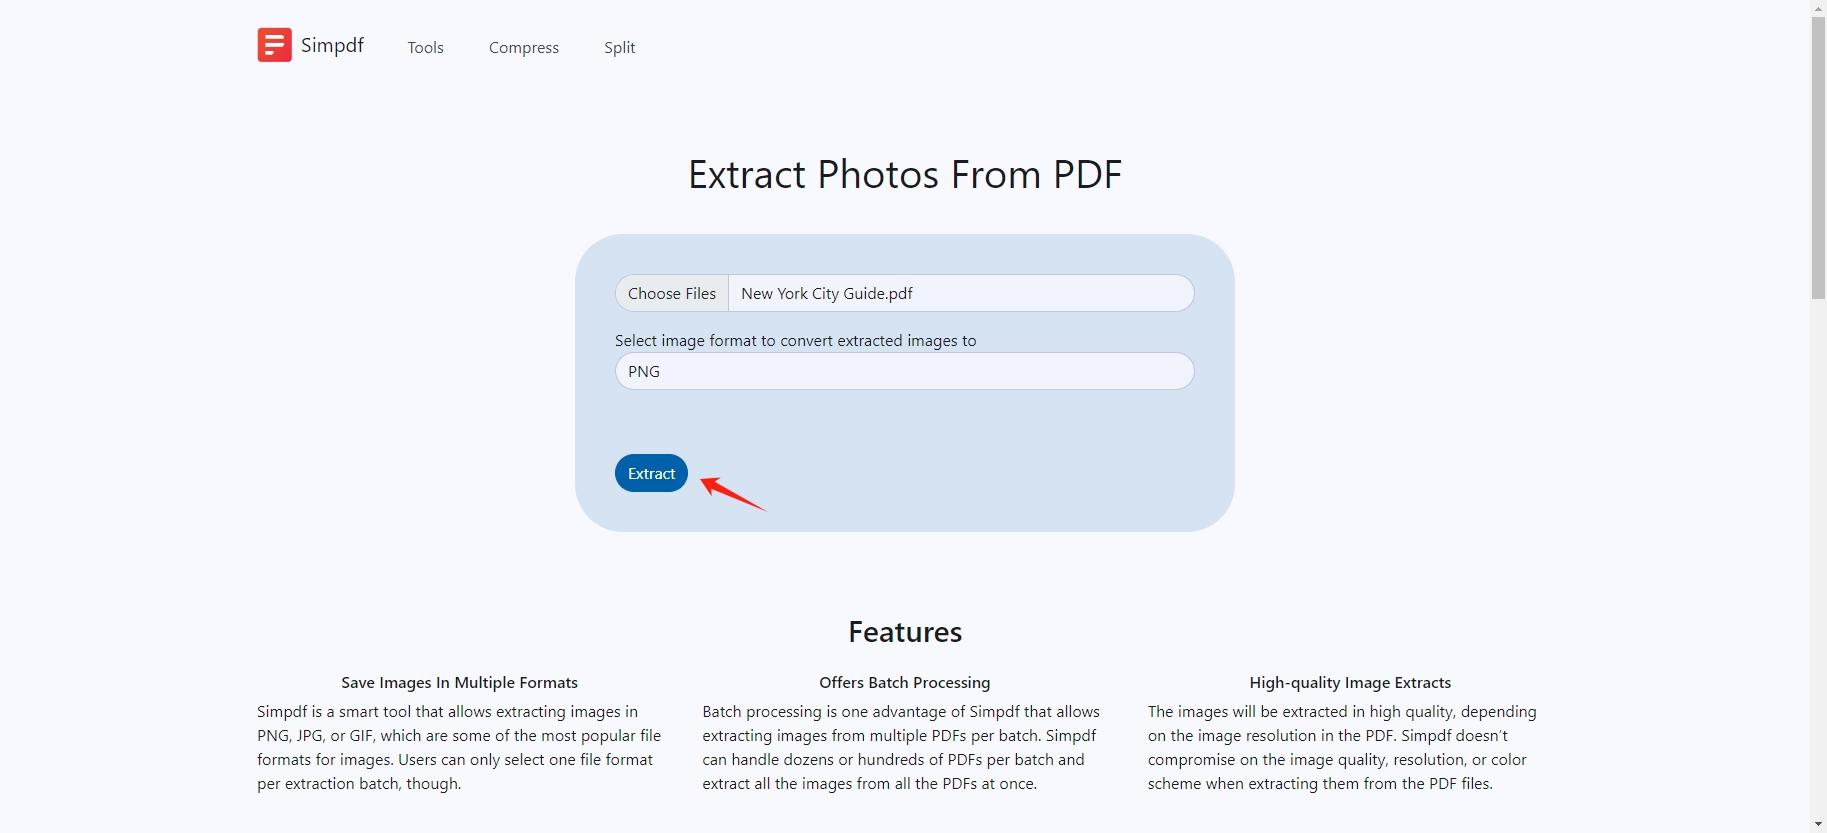 click to extract pdf images with simpdf